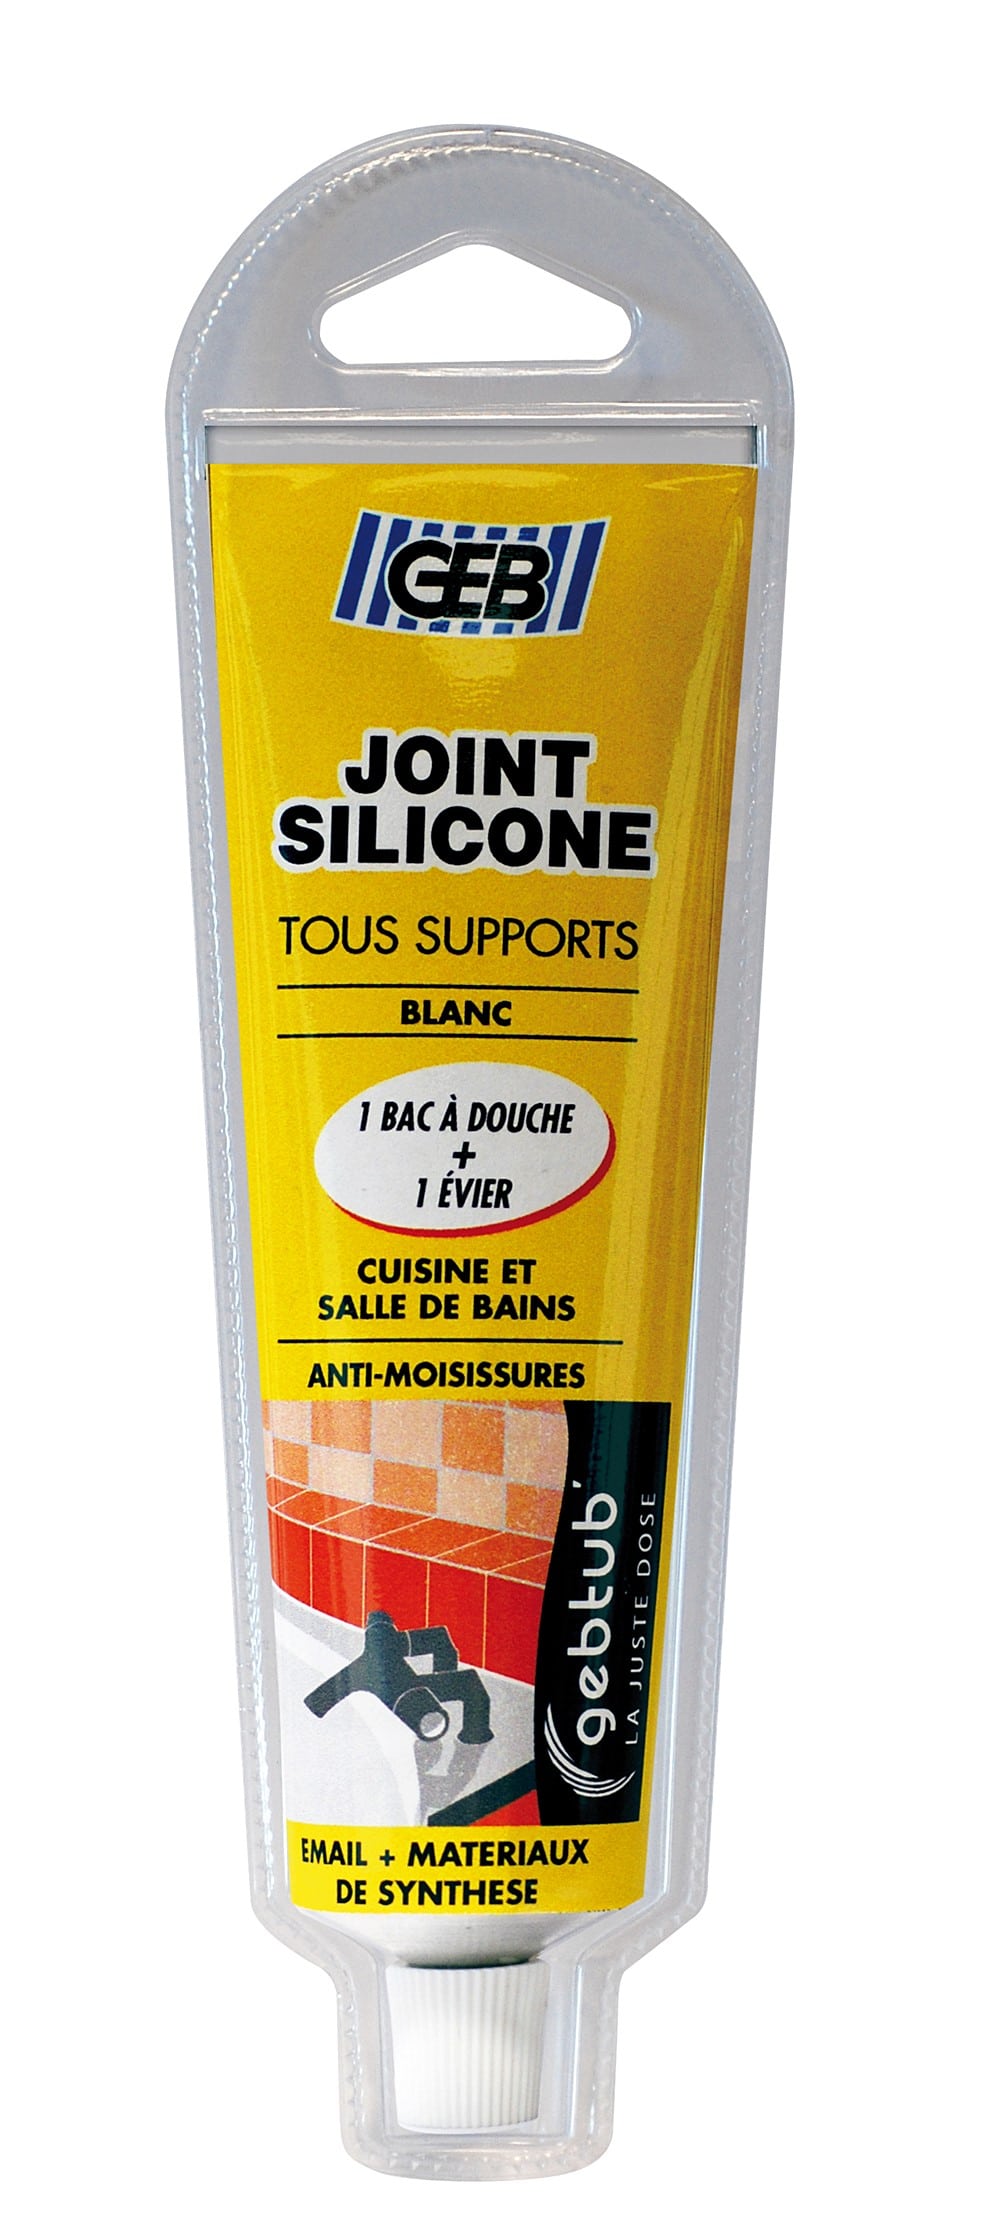 SILICONE TOUS SUPPORTS - Geb Particulier